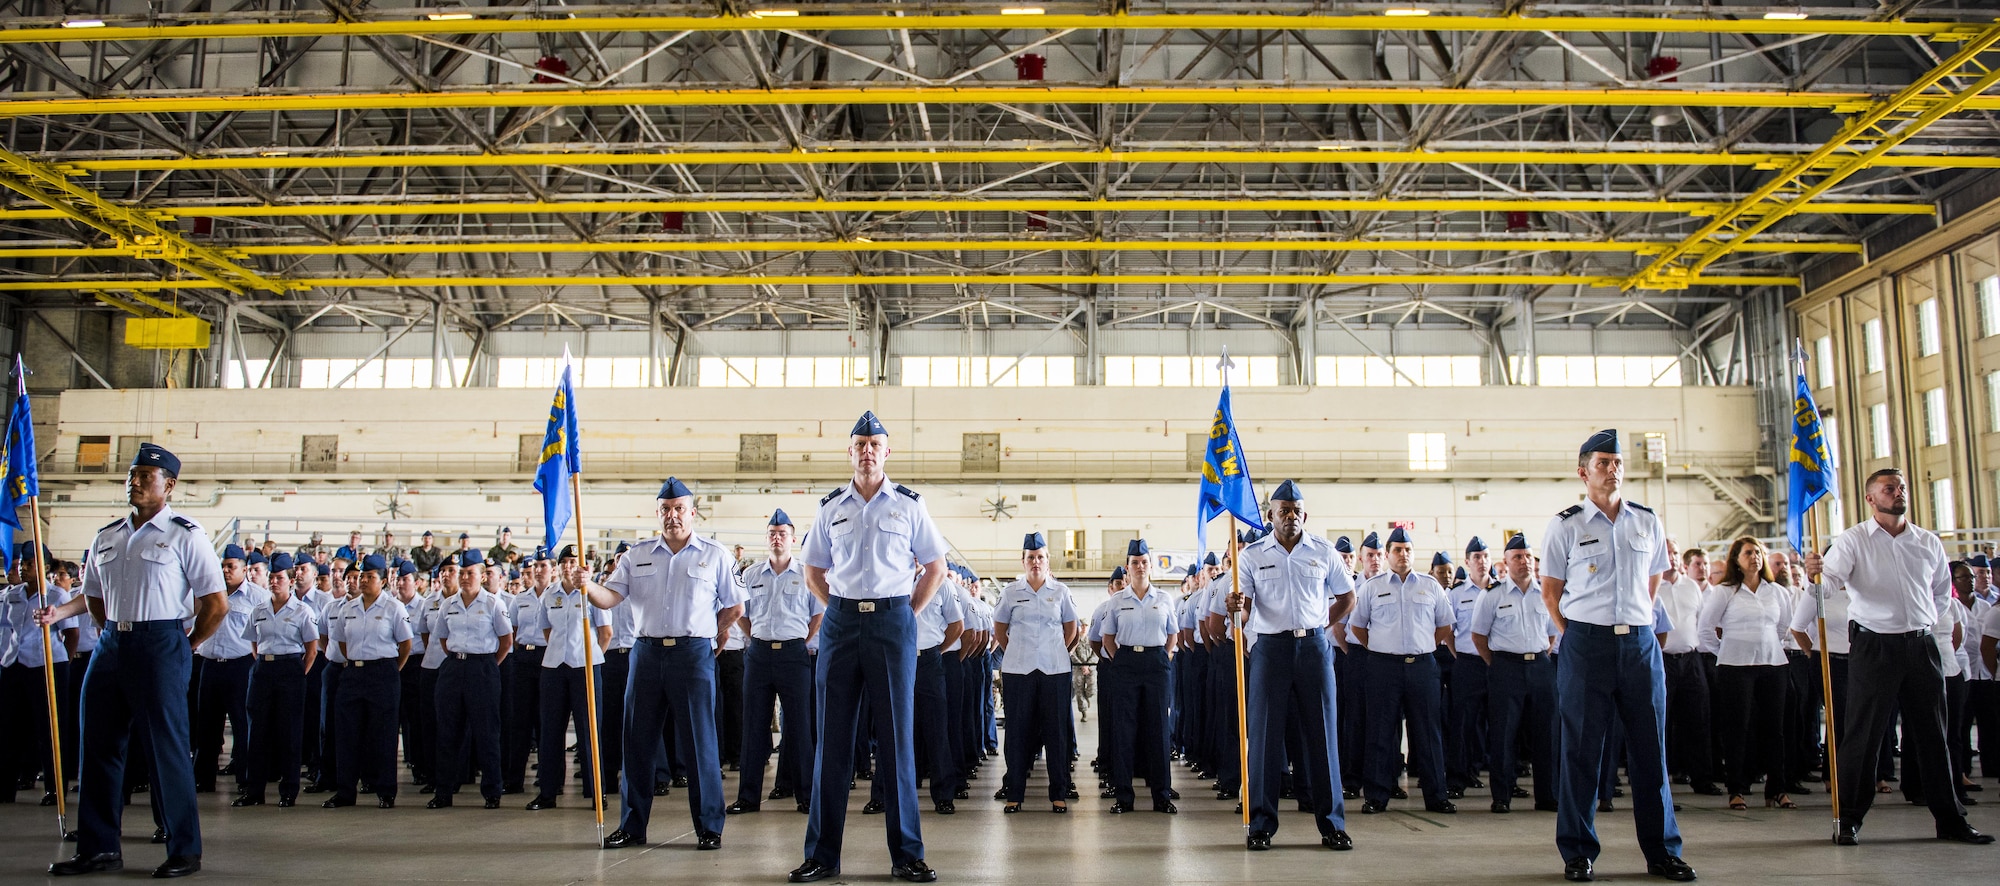 The 96th Test Wing’s Airmen stand in group formations during the 96th Test Wing change of command ceremony at Eglin Air Force Base, Fla., May 31.  Brig. Gen. Christopher Azzano relinquished command to Brig. Gen. Evan Dertien.  The command position is Dertien’s third assignment to Team Eglin.  (U.S. Air Force photo/Samuel King Jr.)